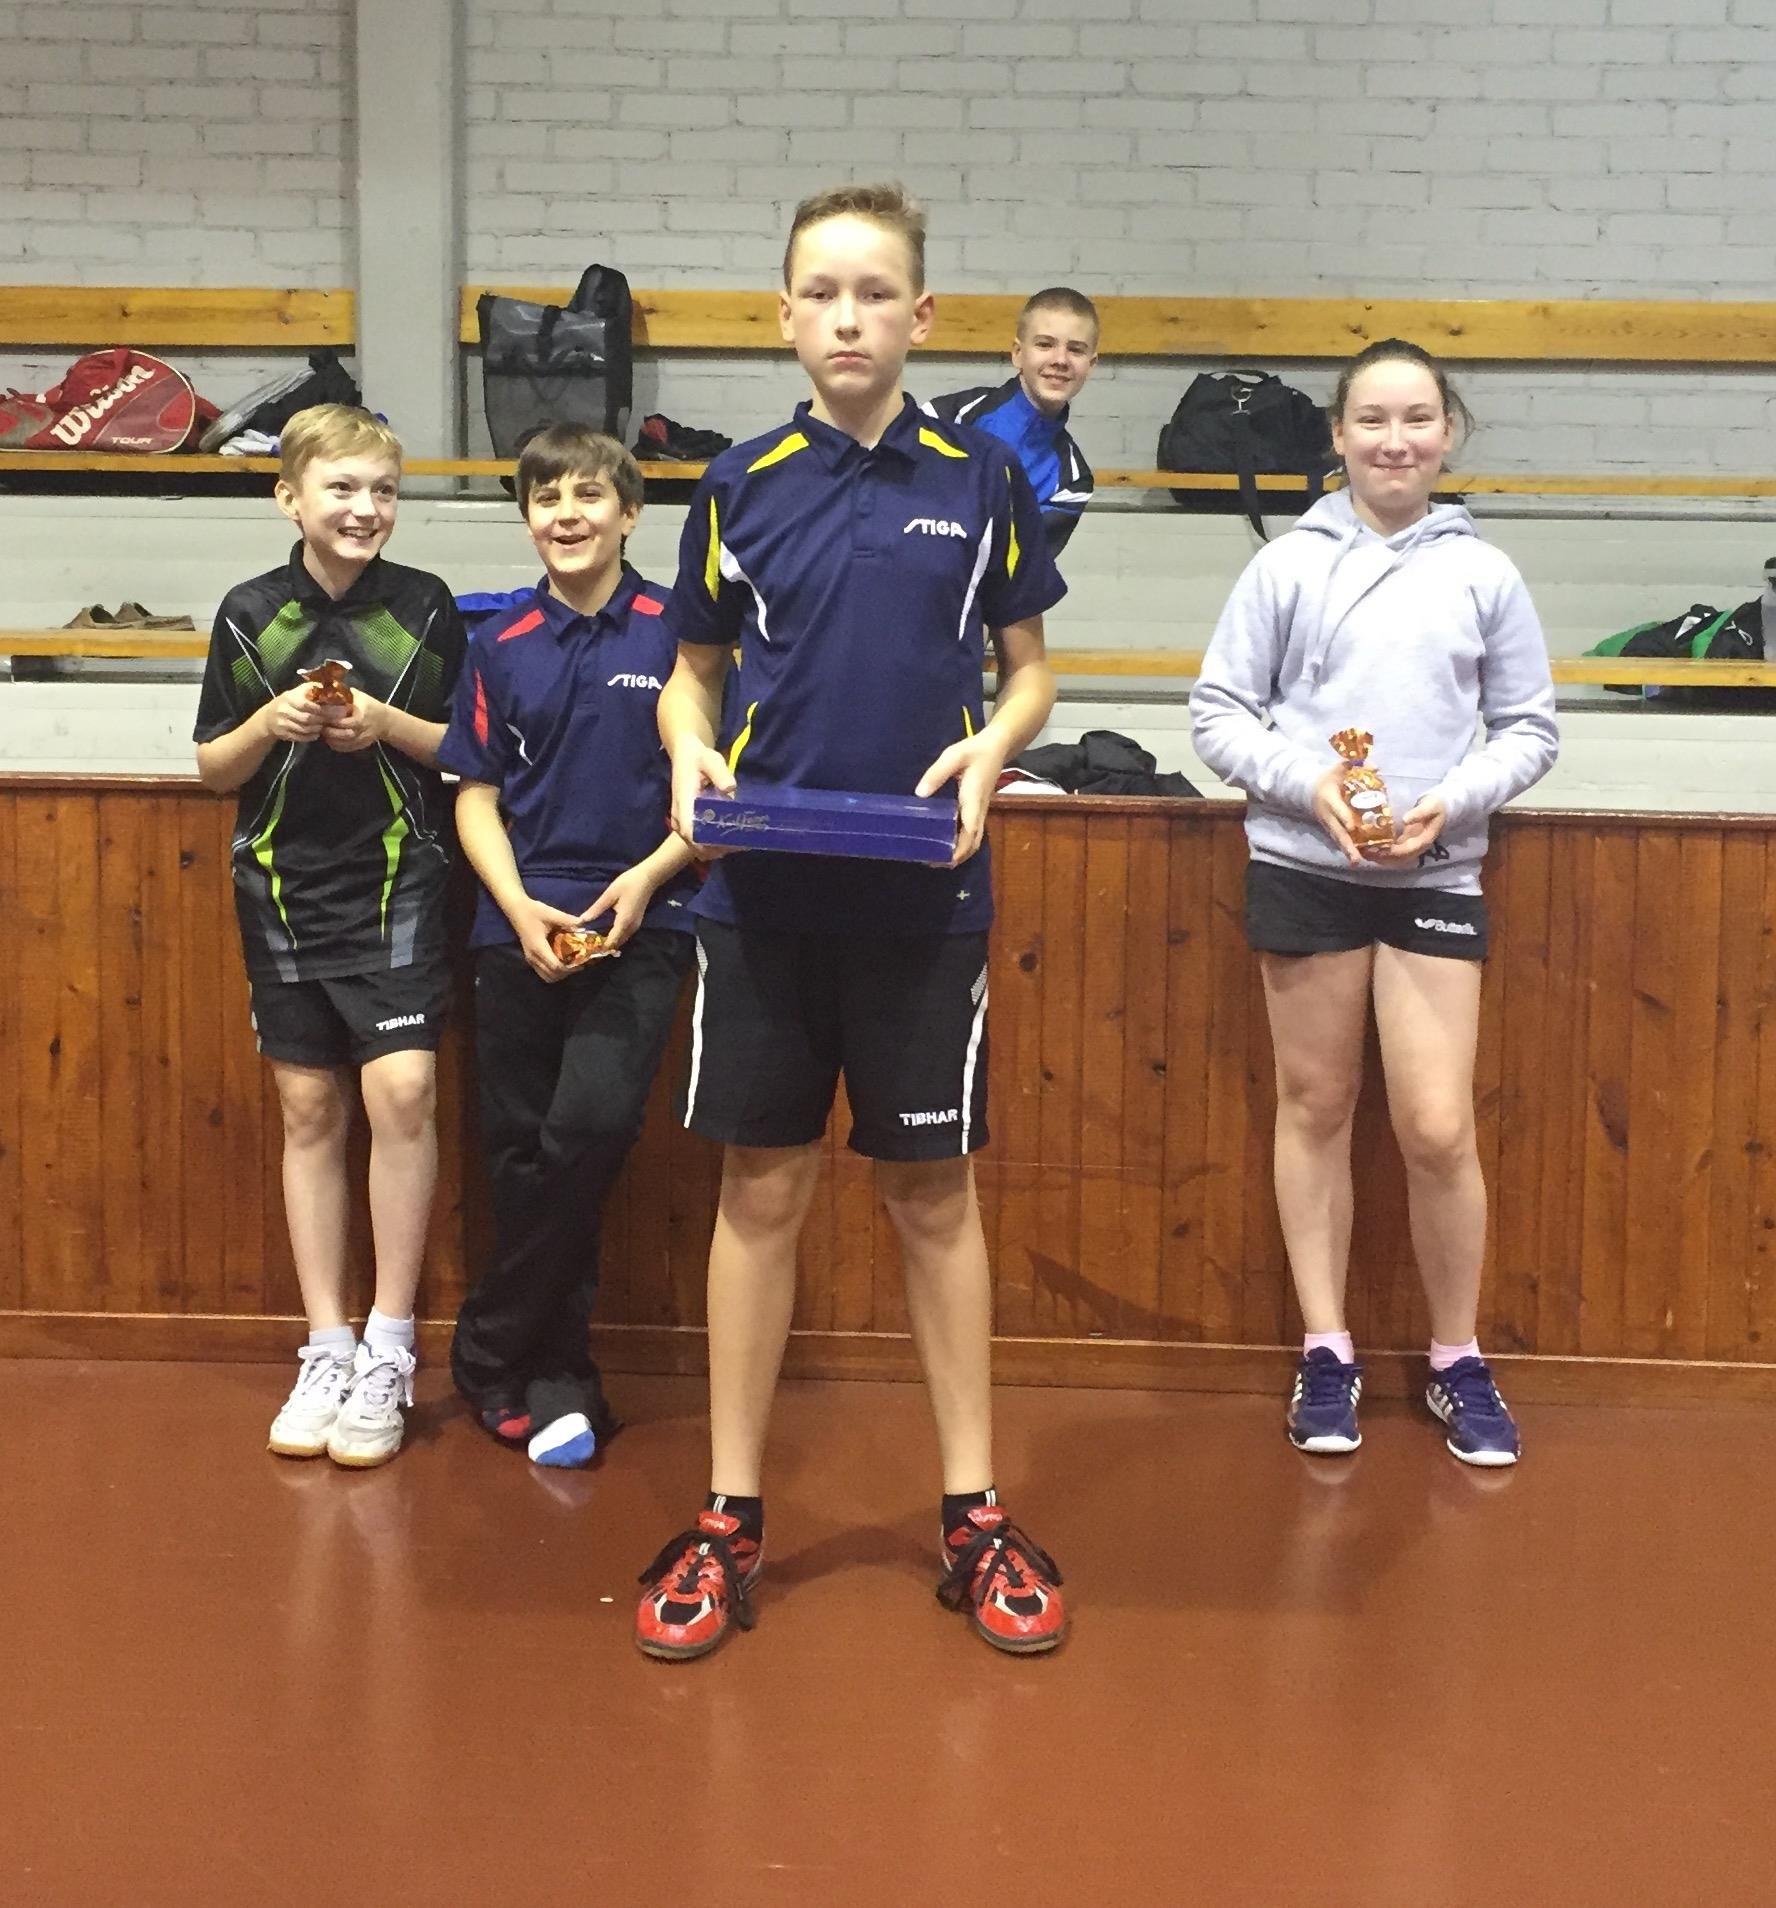 M14 Arttu Pöri was winner of boys14. In the background on the right is Roose-Marii Randlaht who was second.